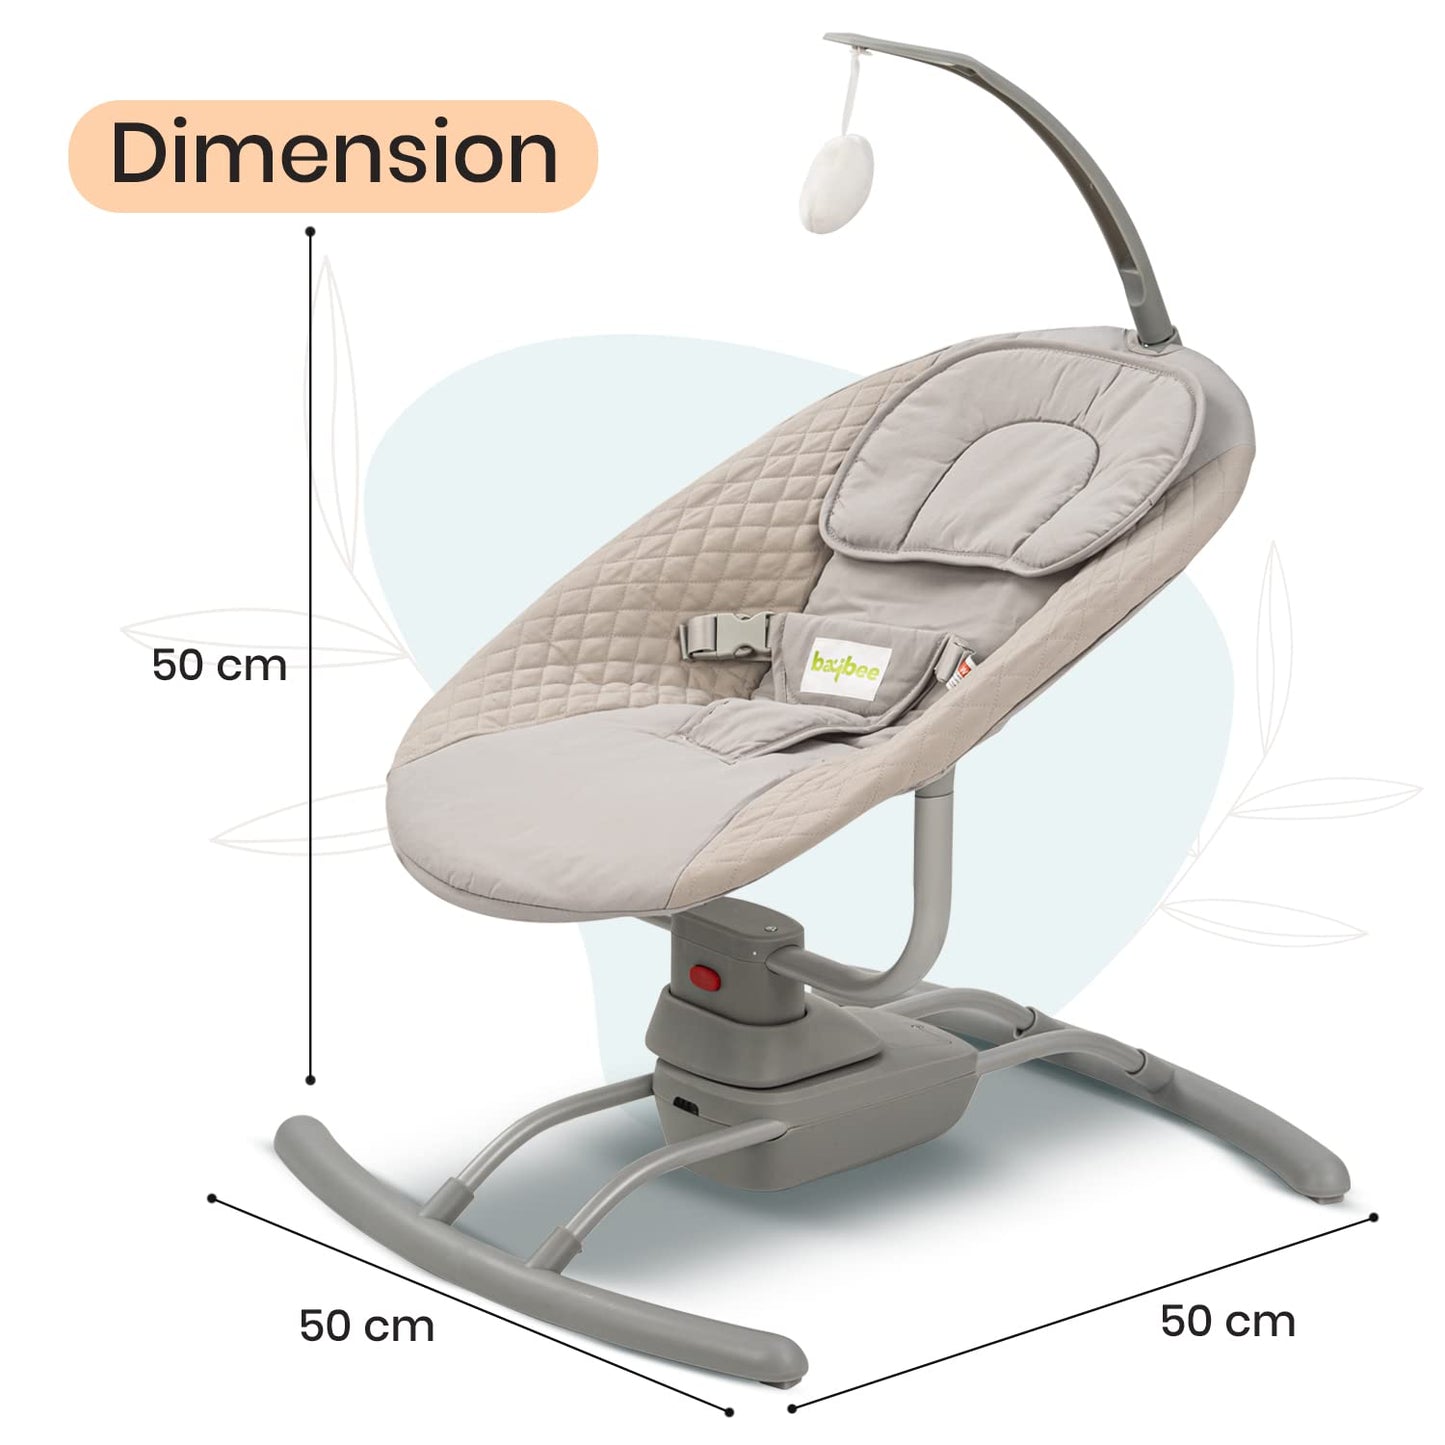 Baybee Nova Automatic Electric Baby Swing Cradle with 3 Adjustable Swing Speed, Soothing Music & 3 Point Safety Belt - Grey